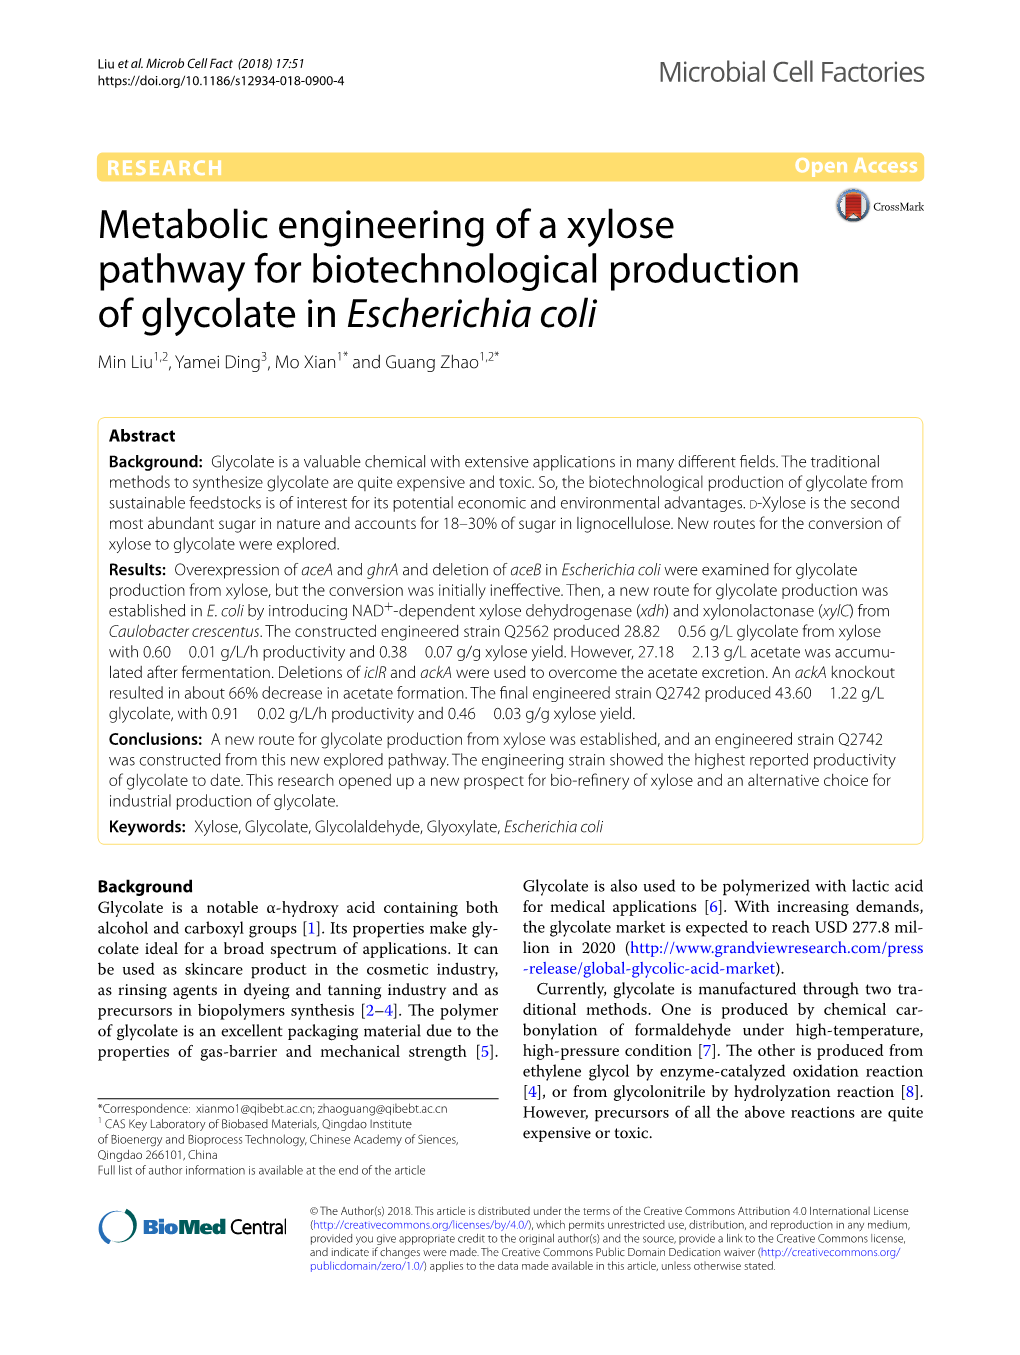 Metabolic Engineering of a Xylose Pathway for Biotechnological Production of Glycolate in Escherichia Coli Min Liu1,2, Yamei Ding3, Mo Xian1* and Guang Zhao1,2*